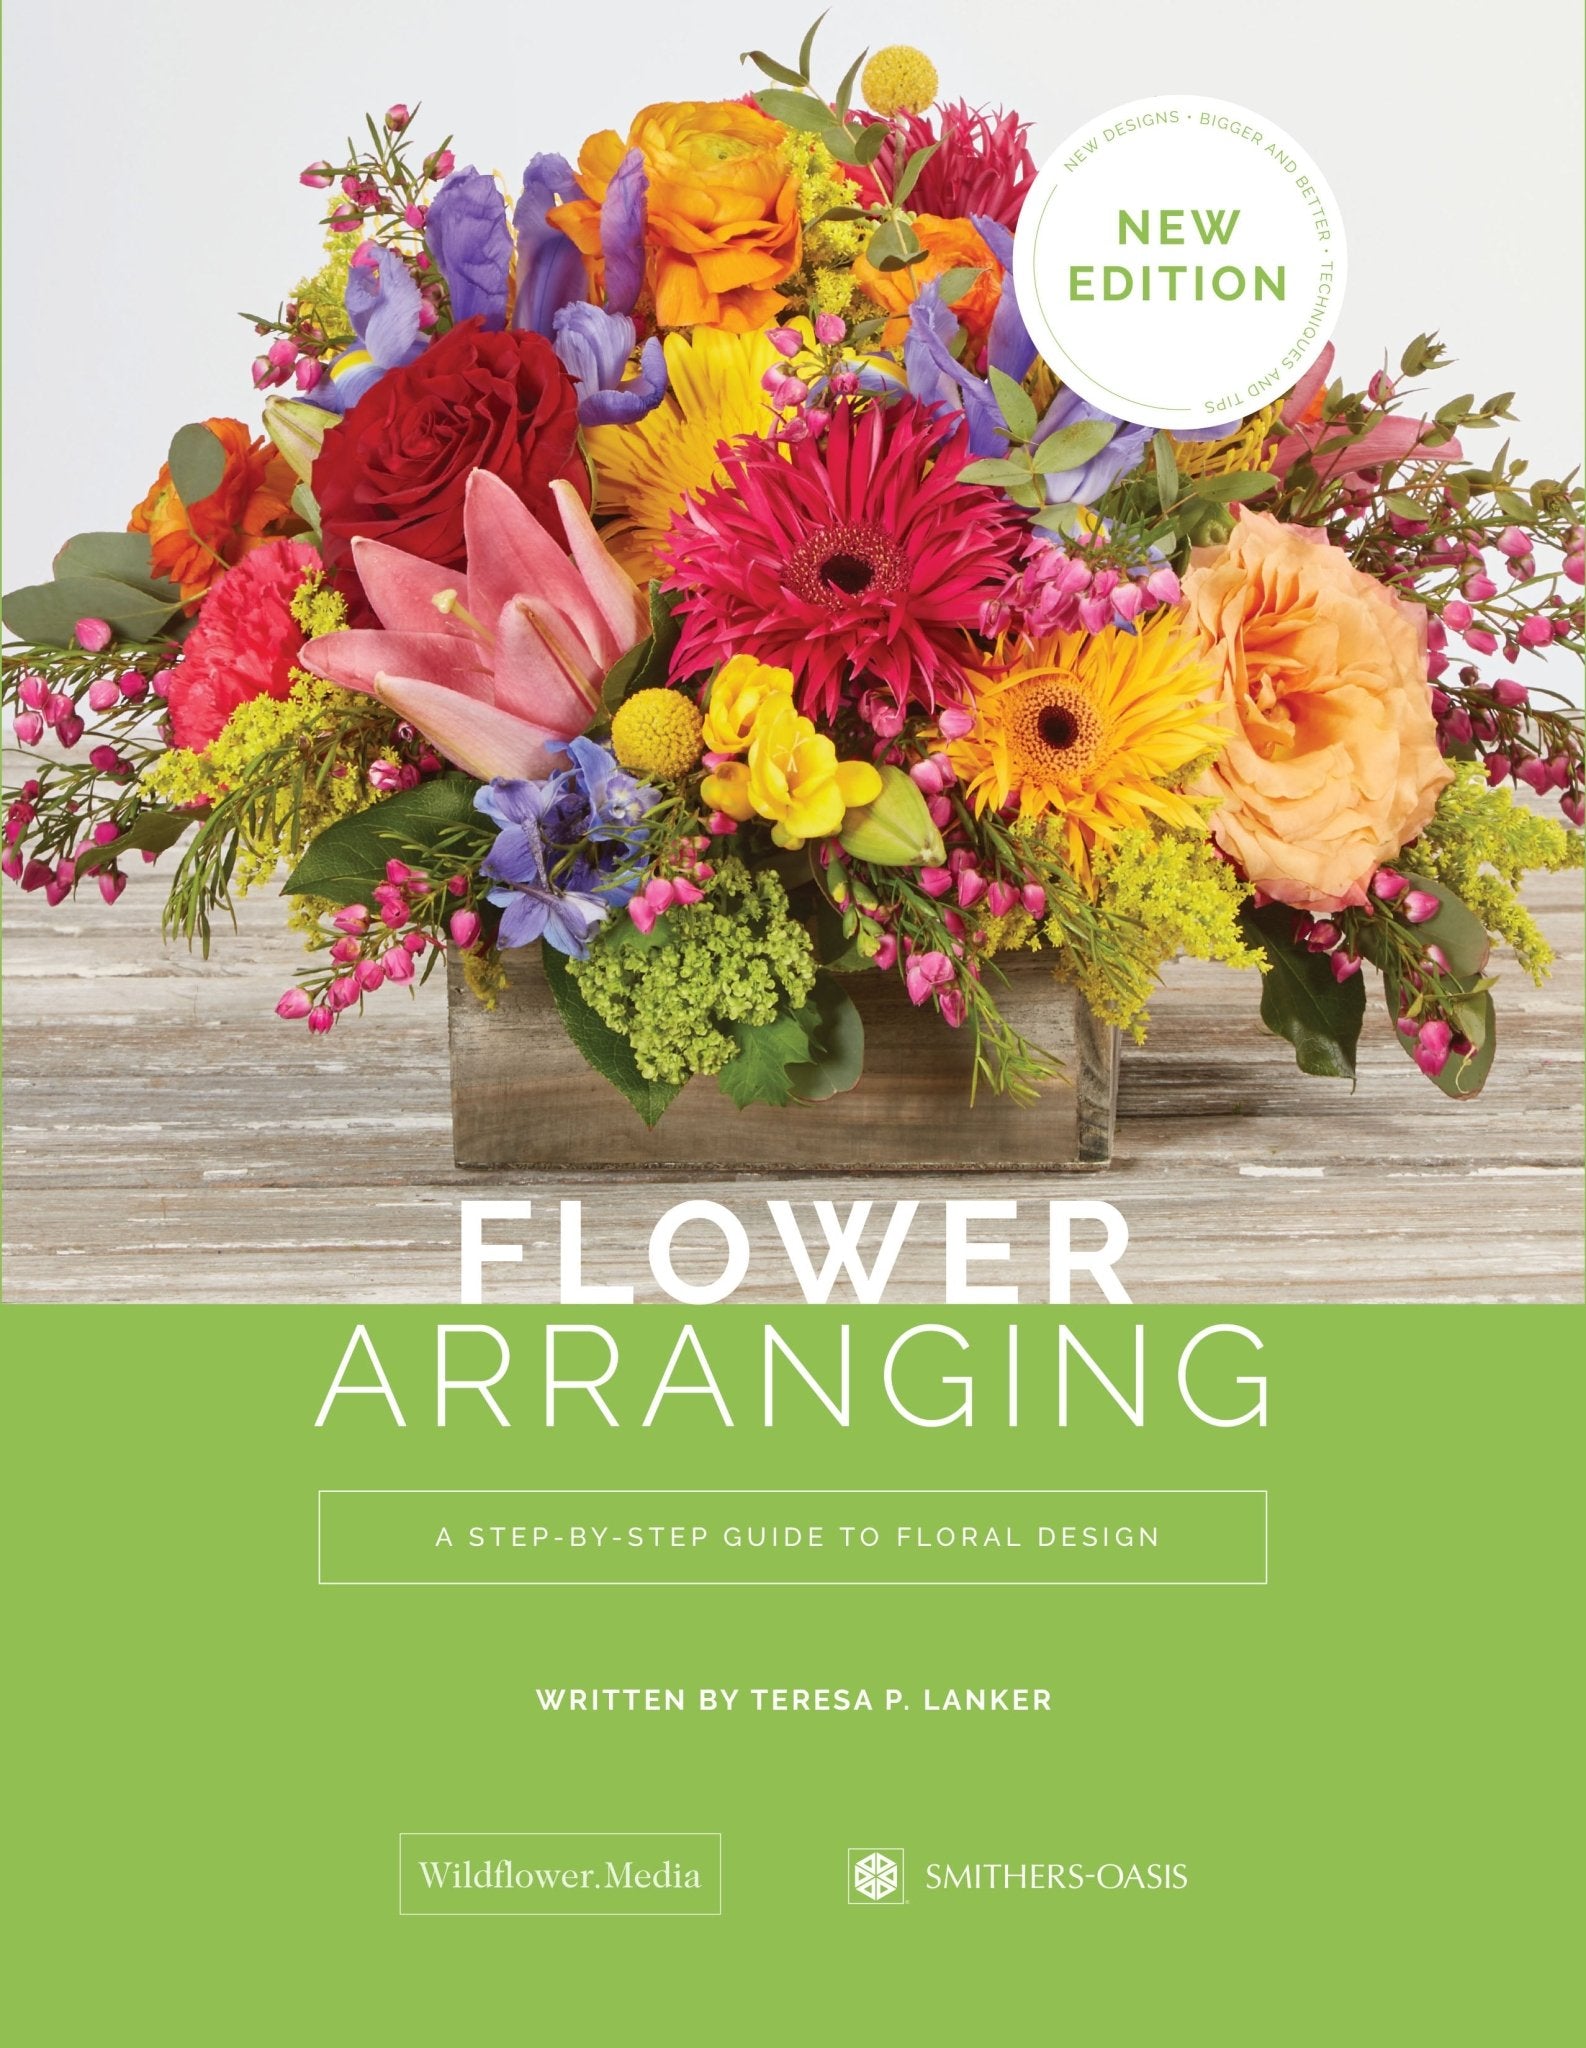 Educational Publisher's Pack - Six of Our Best-Selling Seasonal Floral Design Books - One Great Price! - WildFlower Media